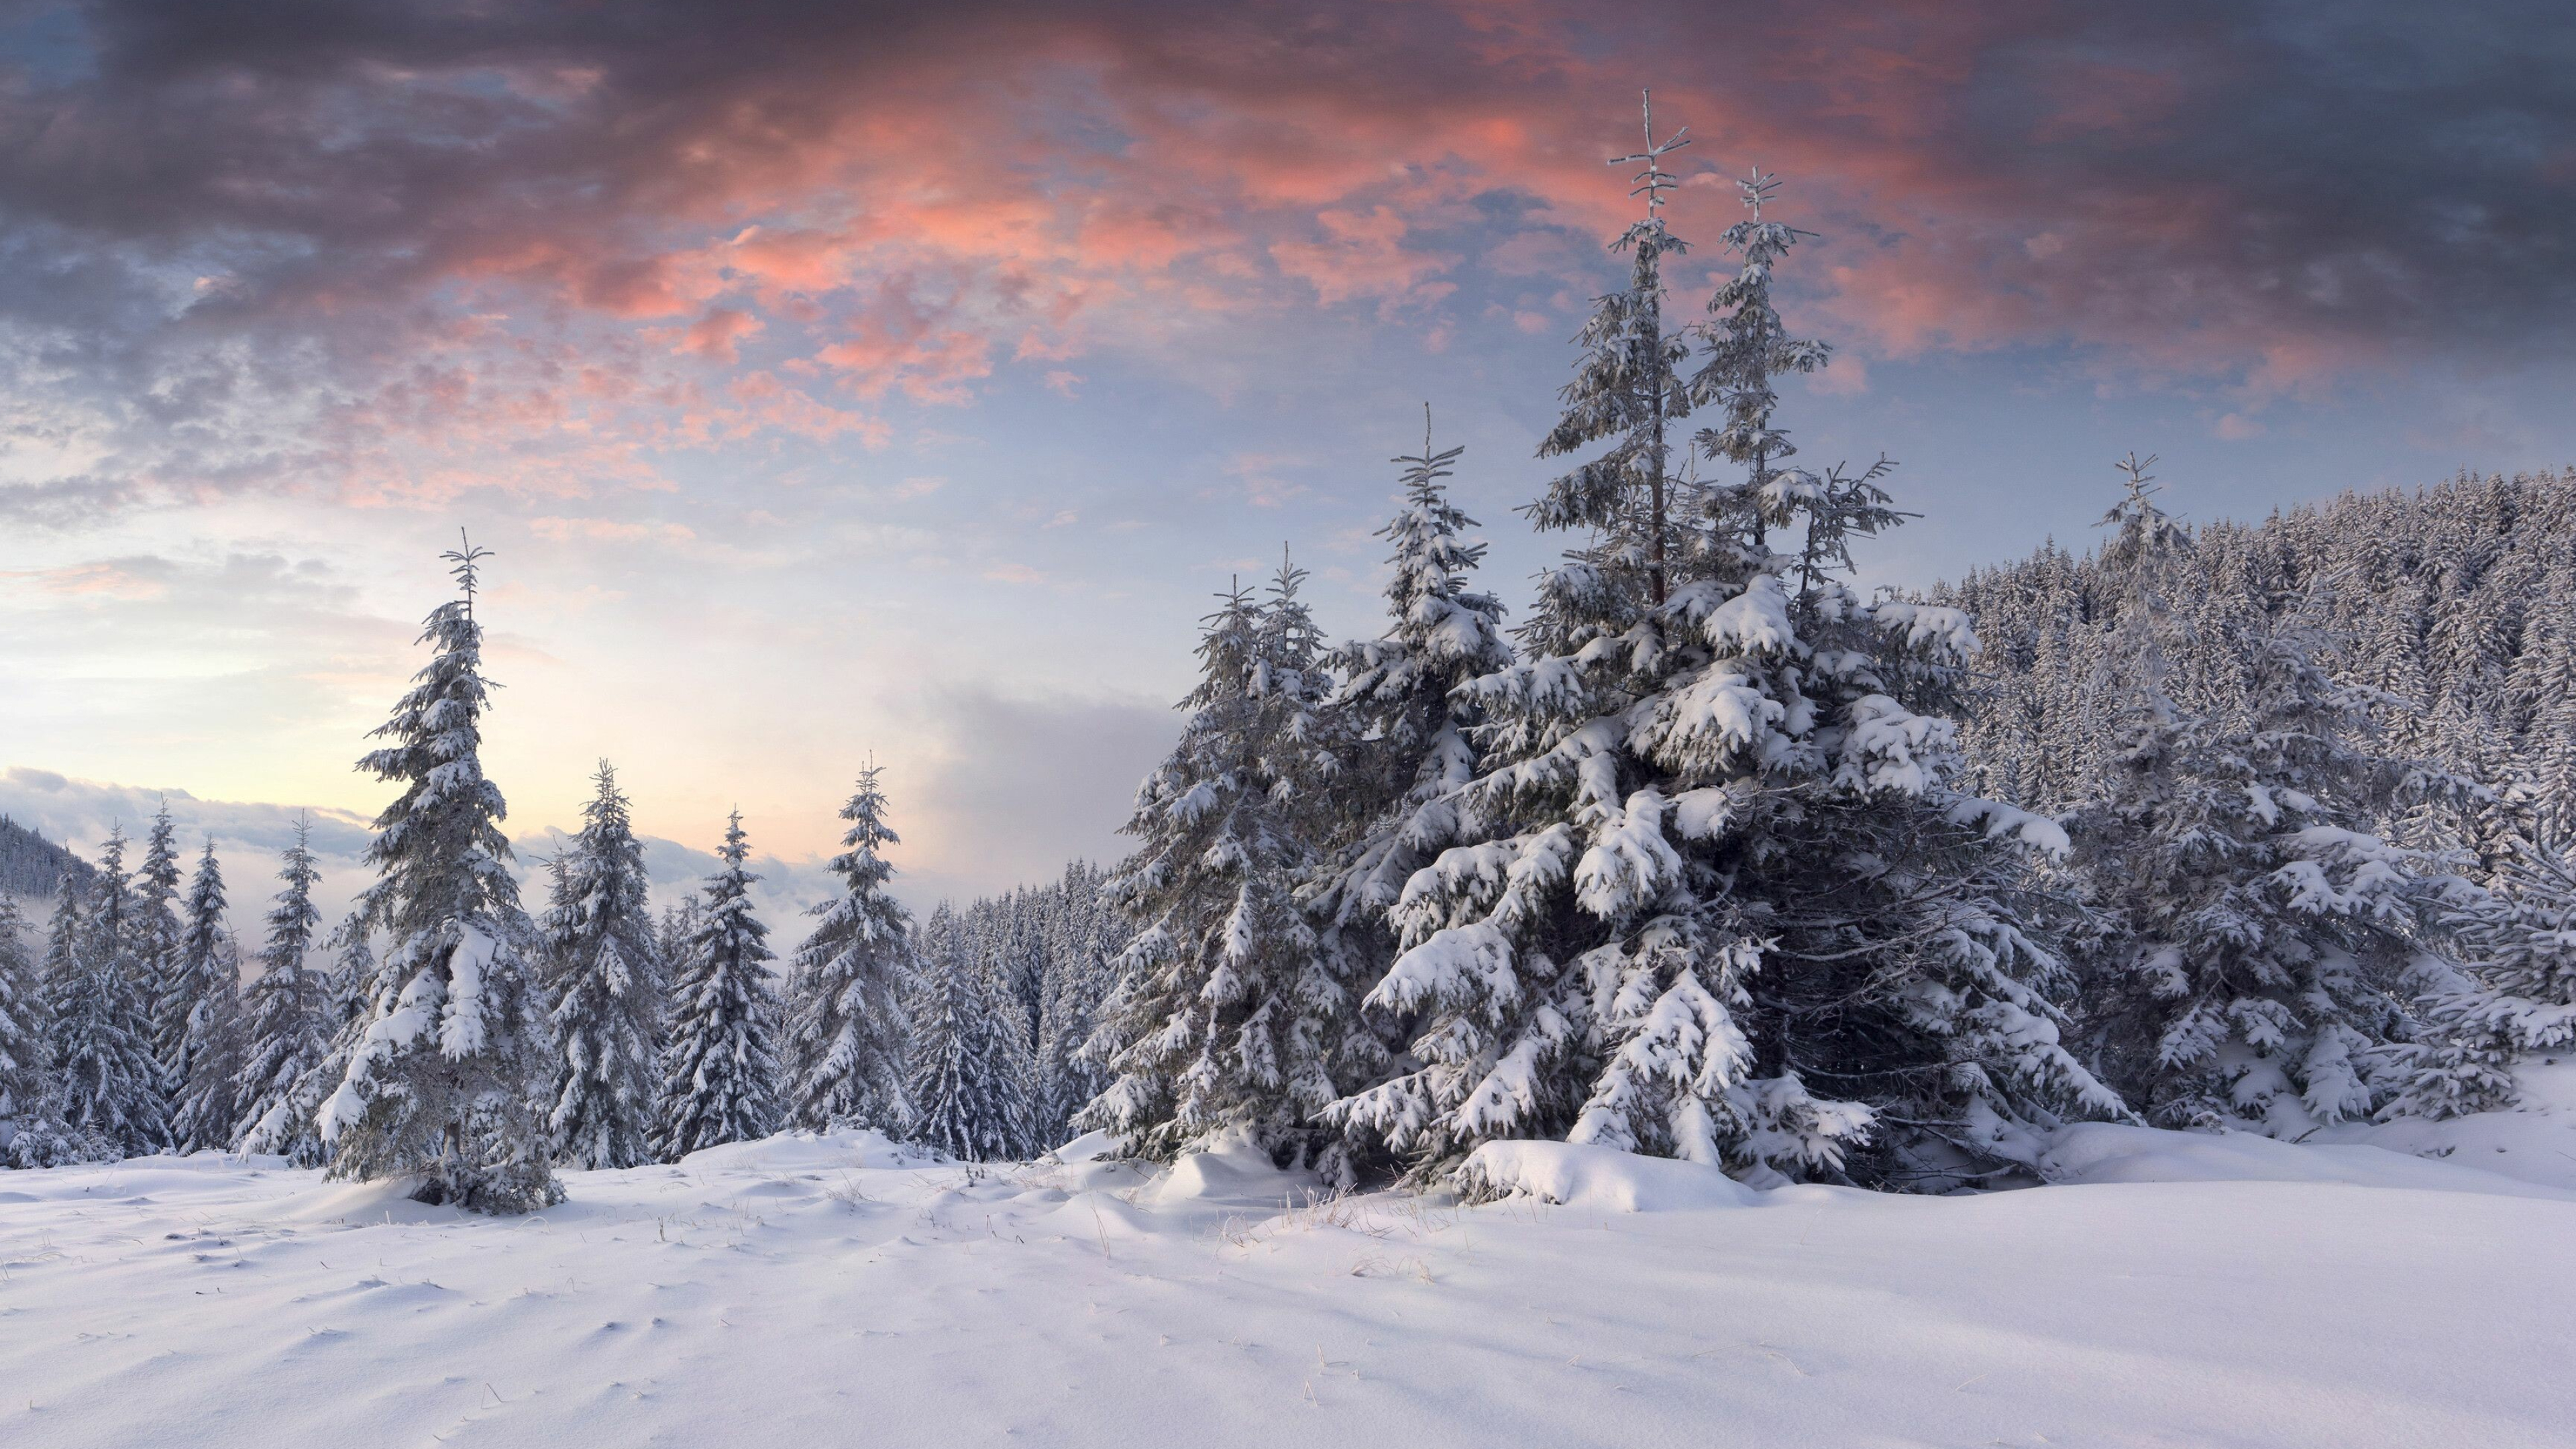 Winter: Snow-сovered forest, Seasonal changes, Chilly. 3840x2160 4K Background.